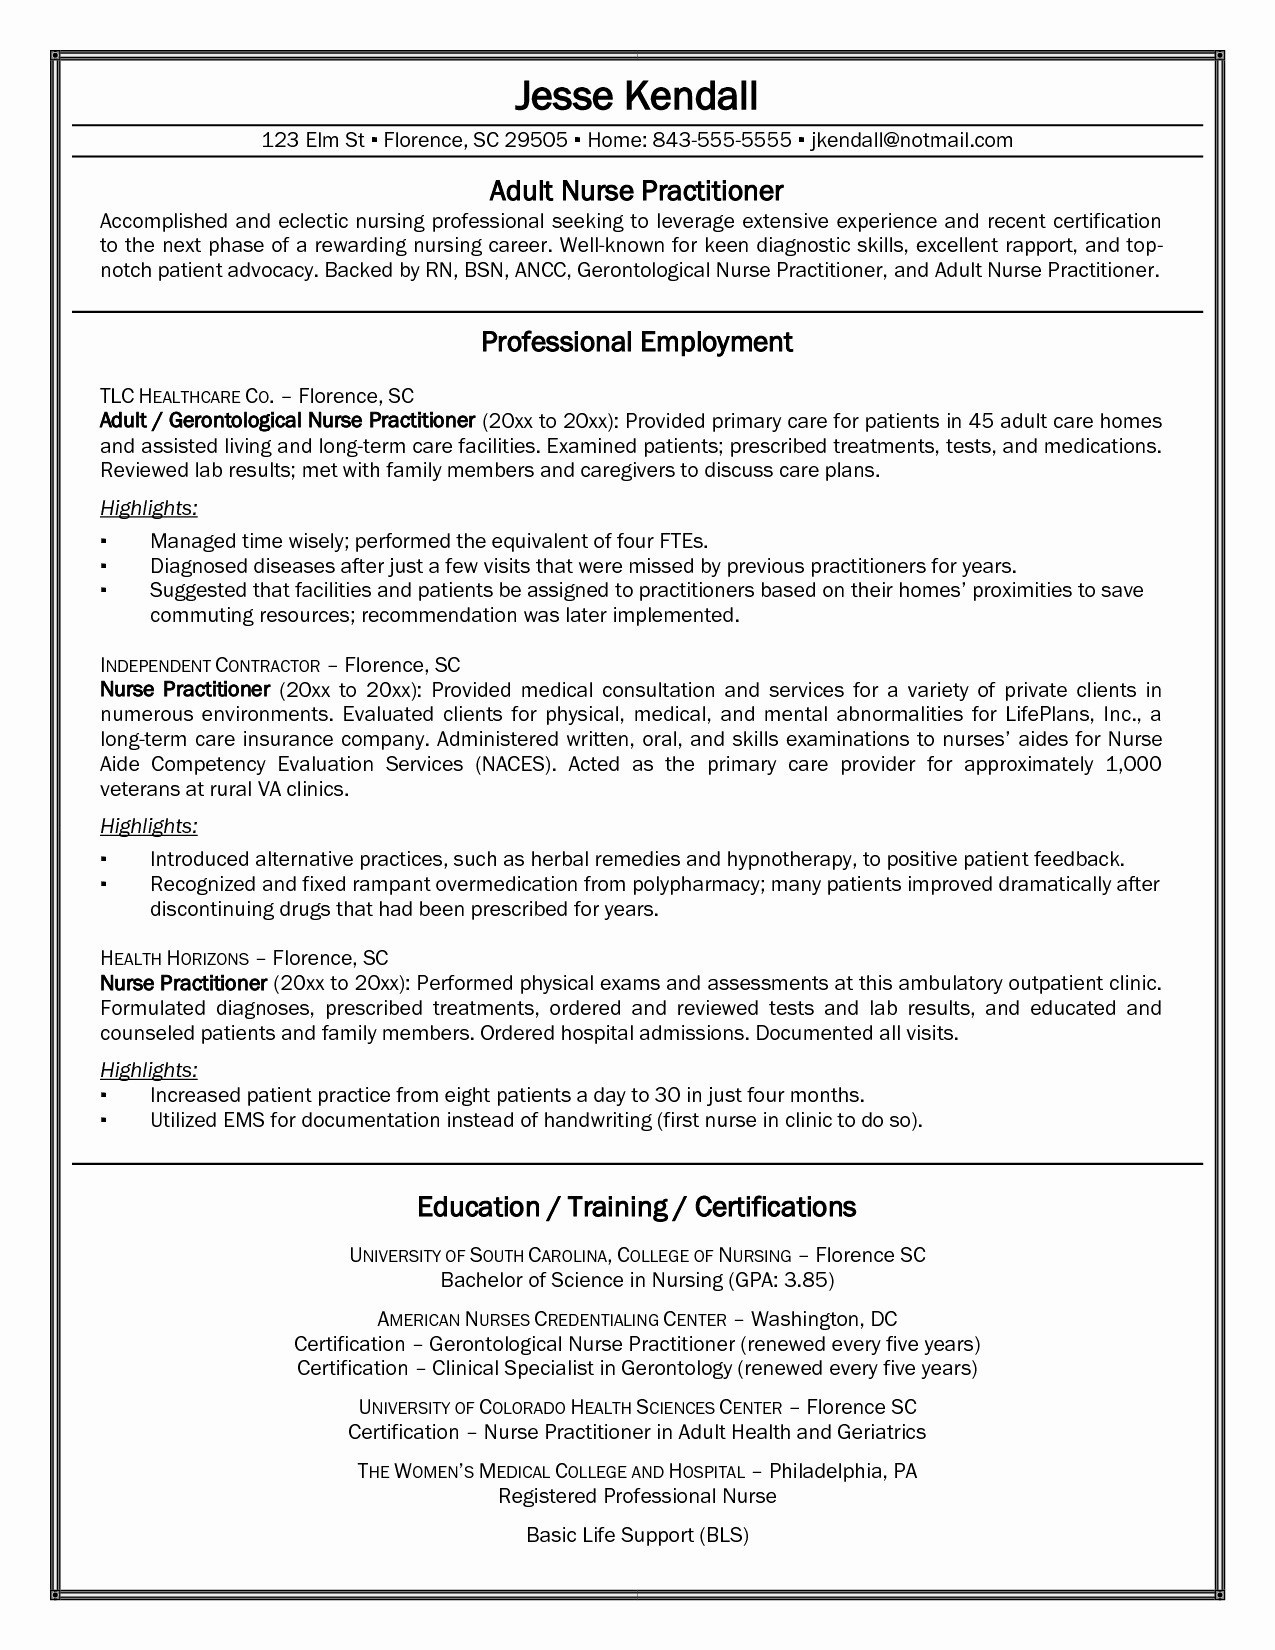 New Nurse Resume Results Based Resume Examples Awesome Wound Care Nurse Resume